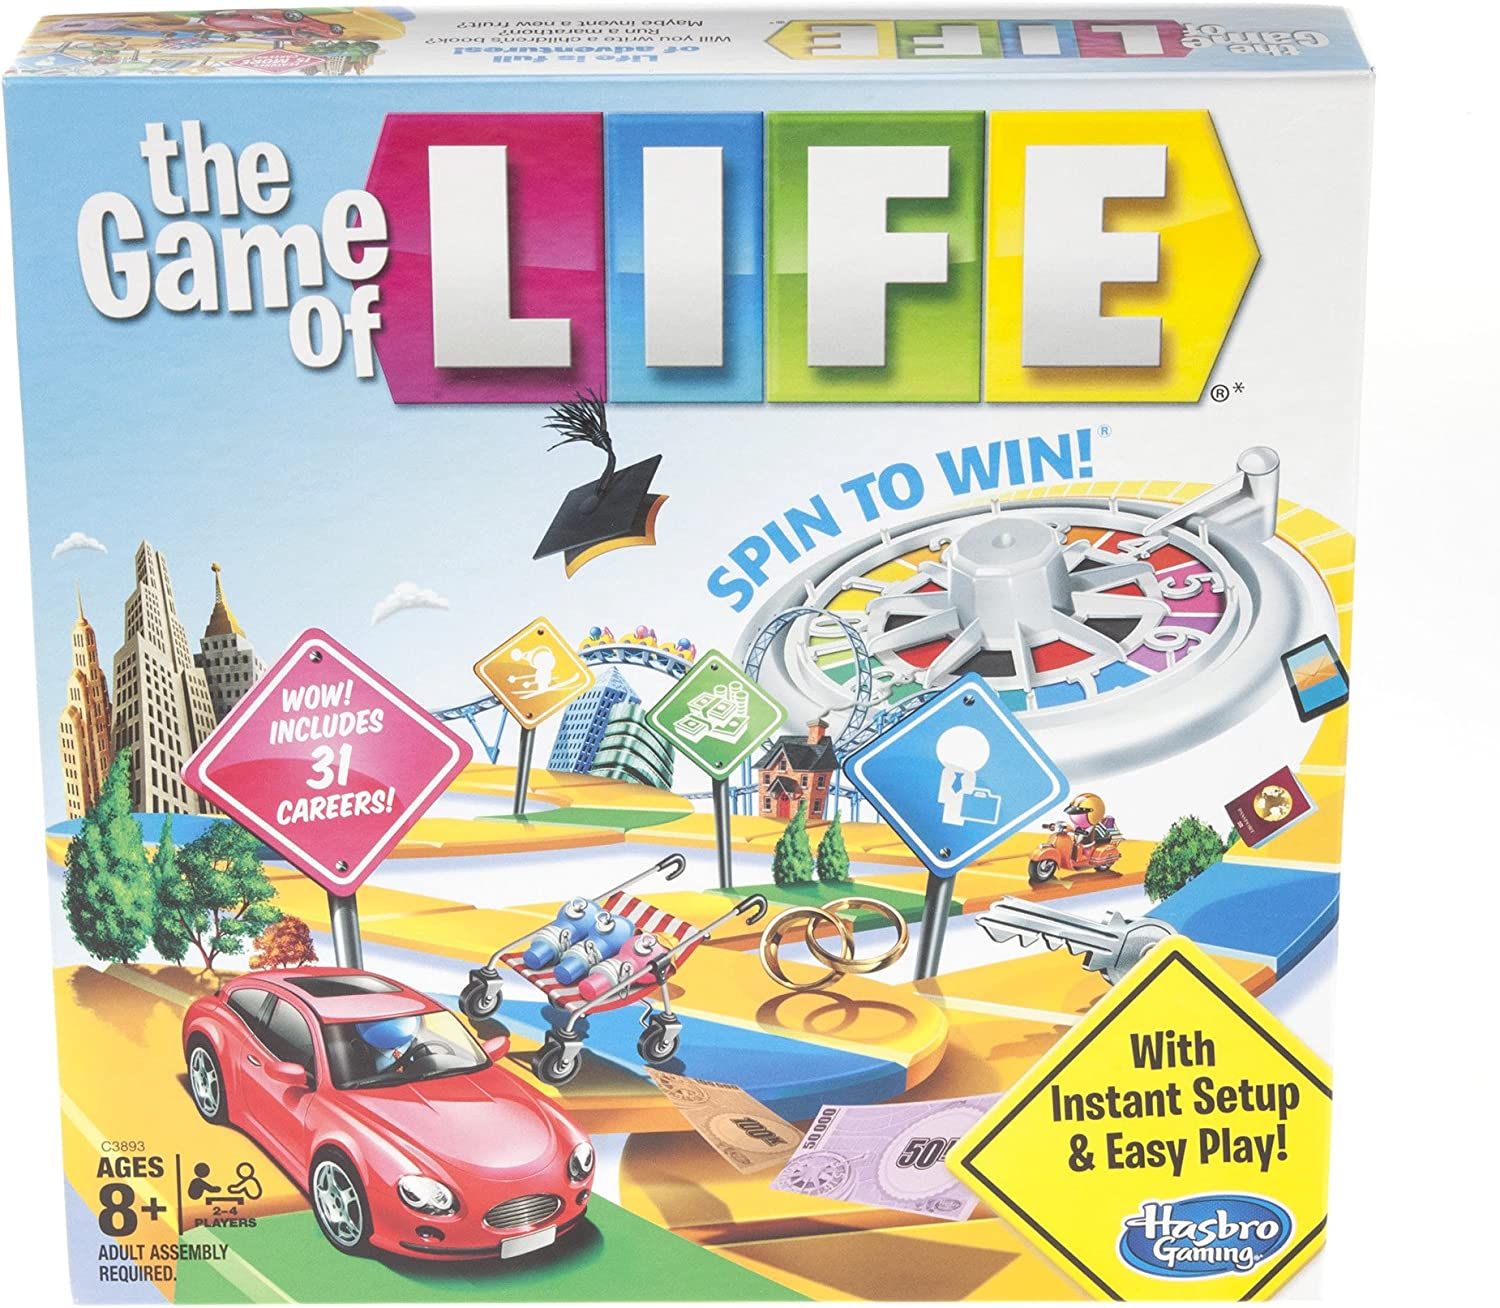 Hasbro The Game of Life is one of the best legacy board games